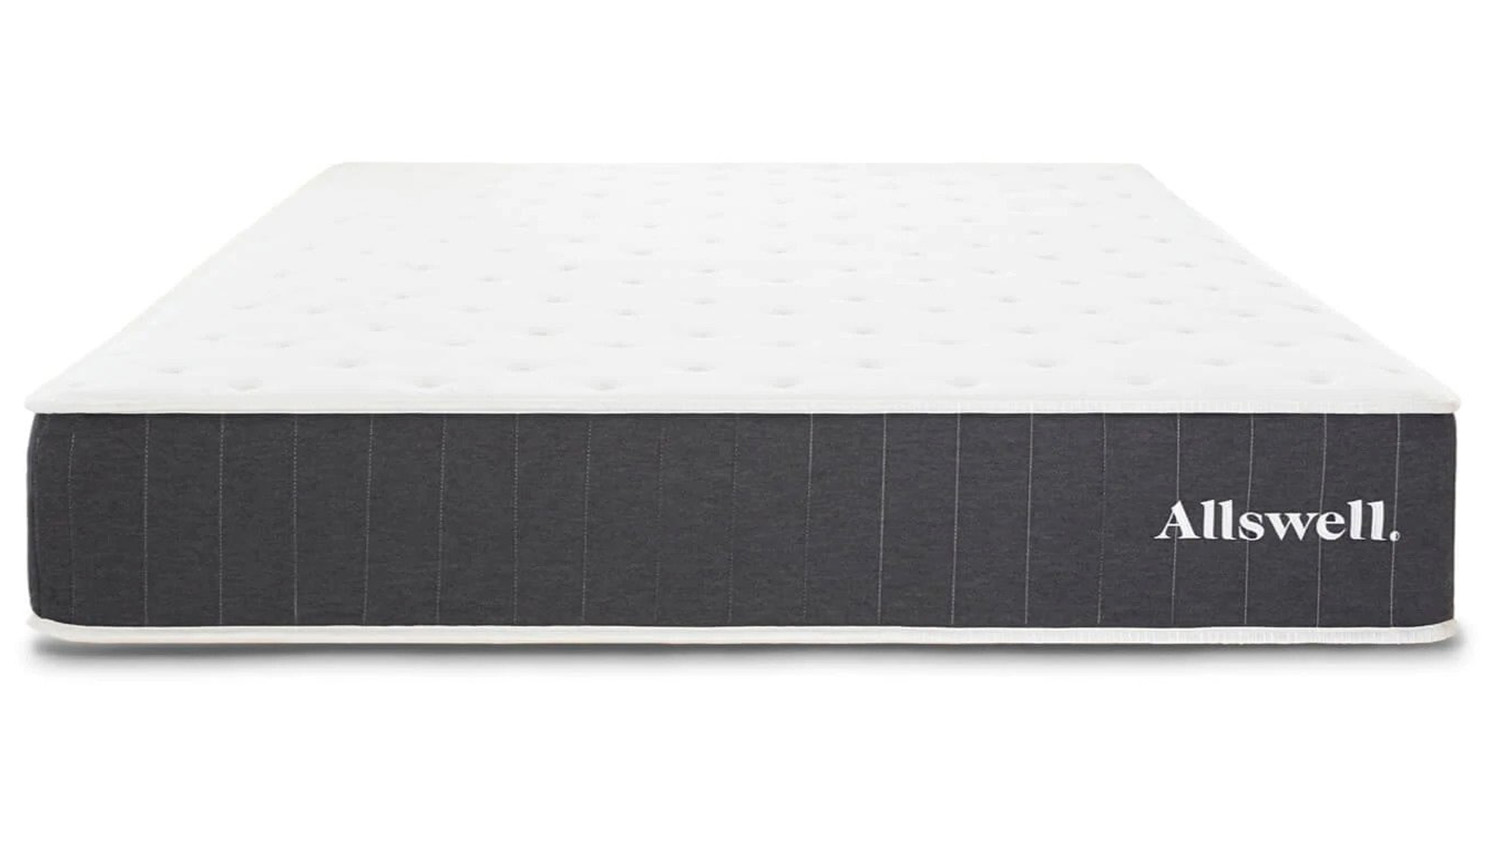 Best budget mattress: The Allswell Mattress photographed with a black base and white quilted top